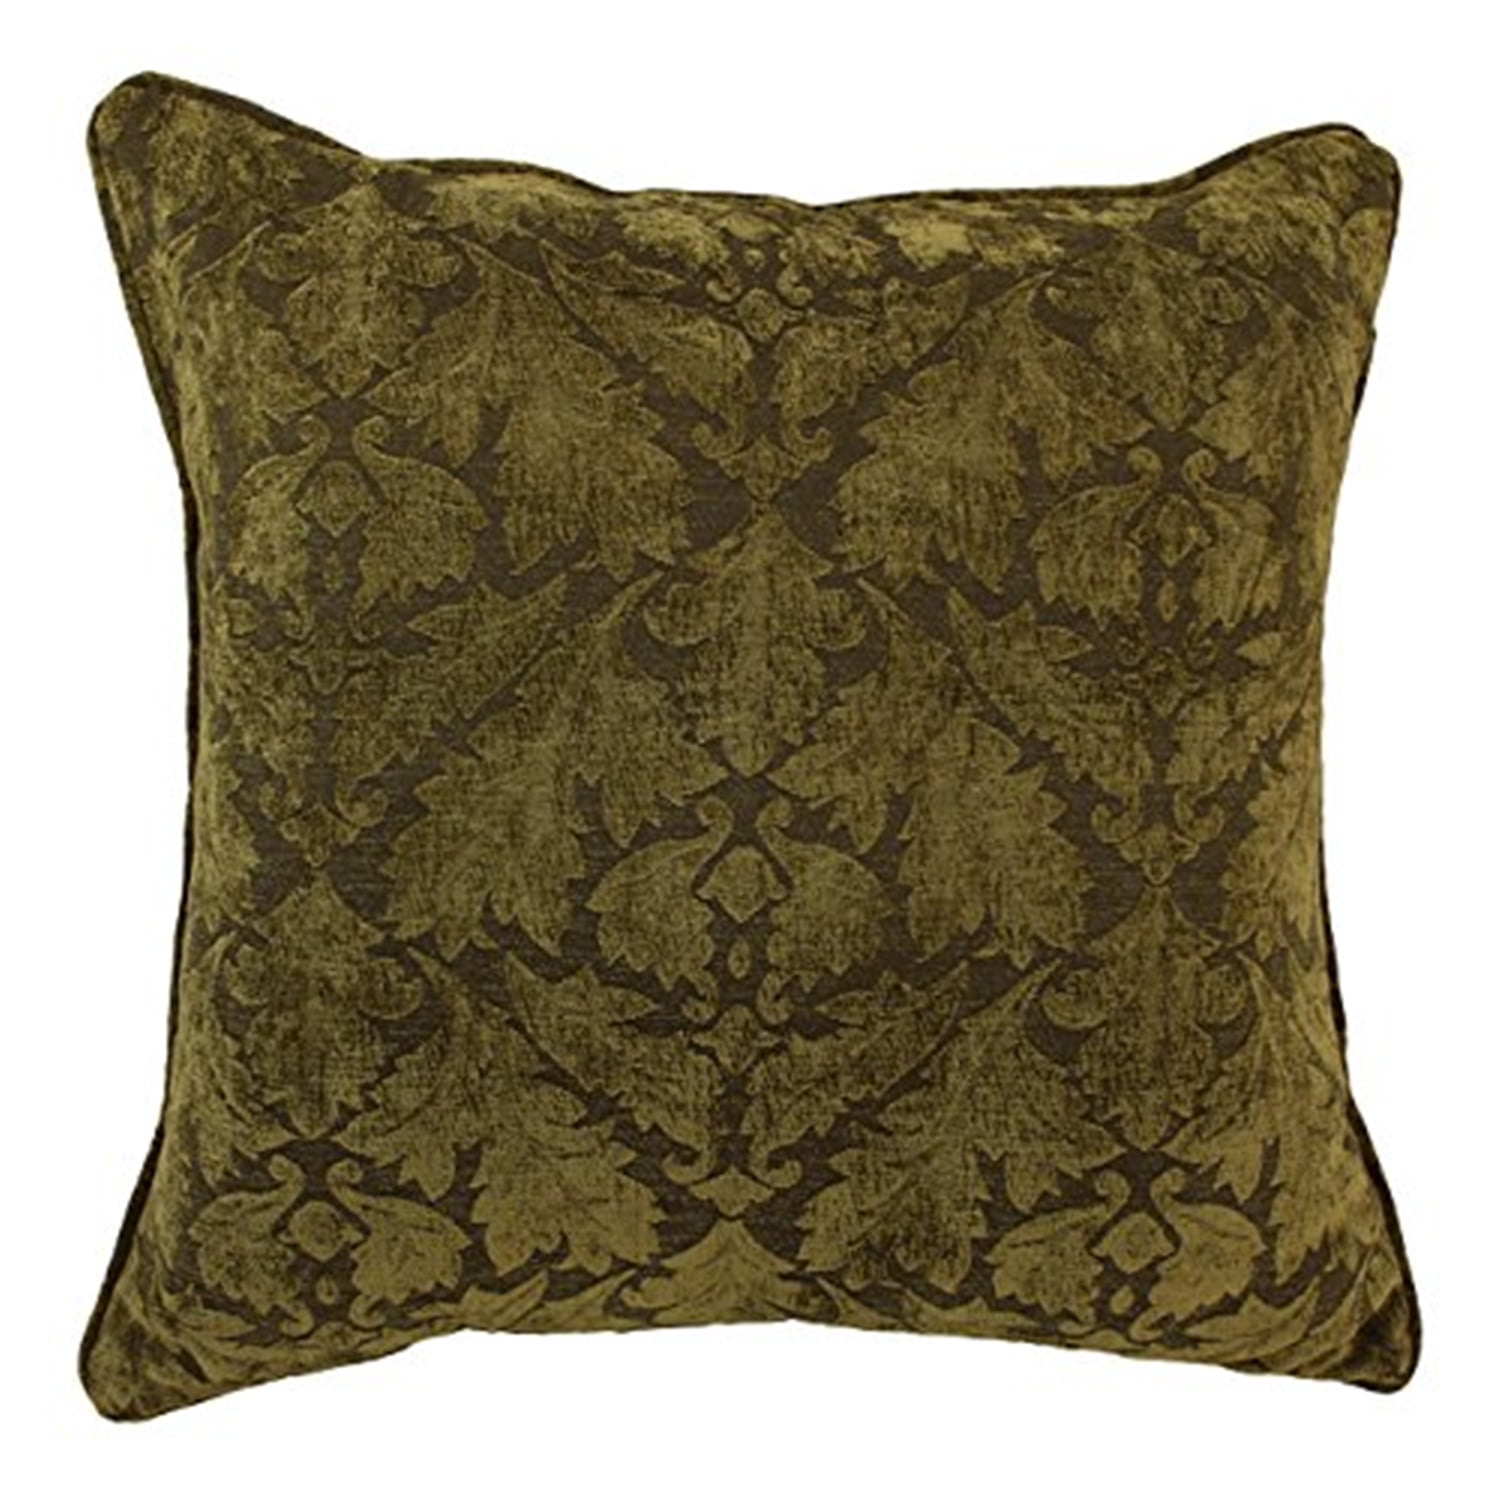 Picture of Blazing Needles 9813-CD-S1-JCH-CO-04 25 in. Double-Corded Patterned Tapestry Square Indoor Floor Pillow with Insert, Floral Beige Damask